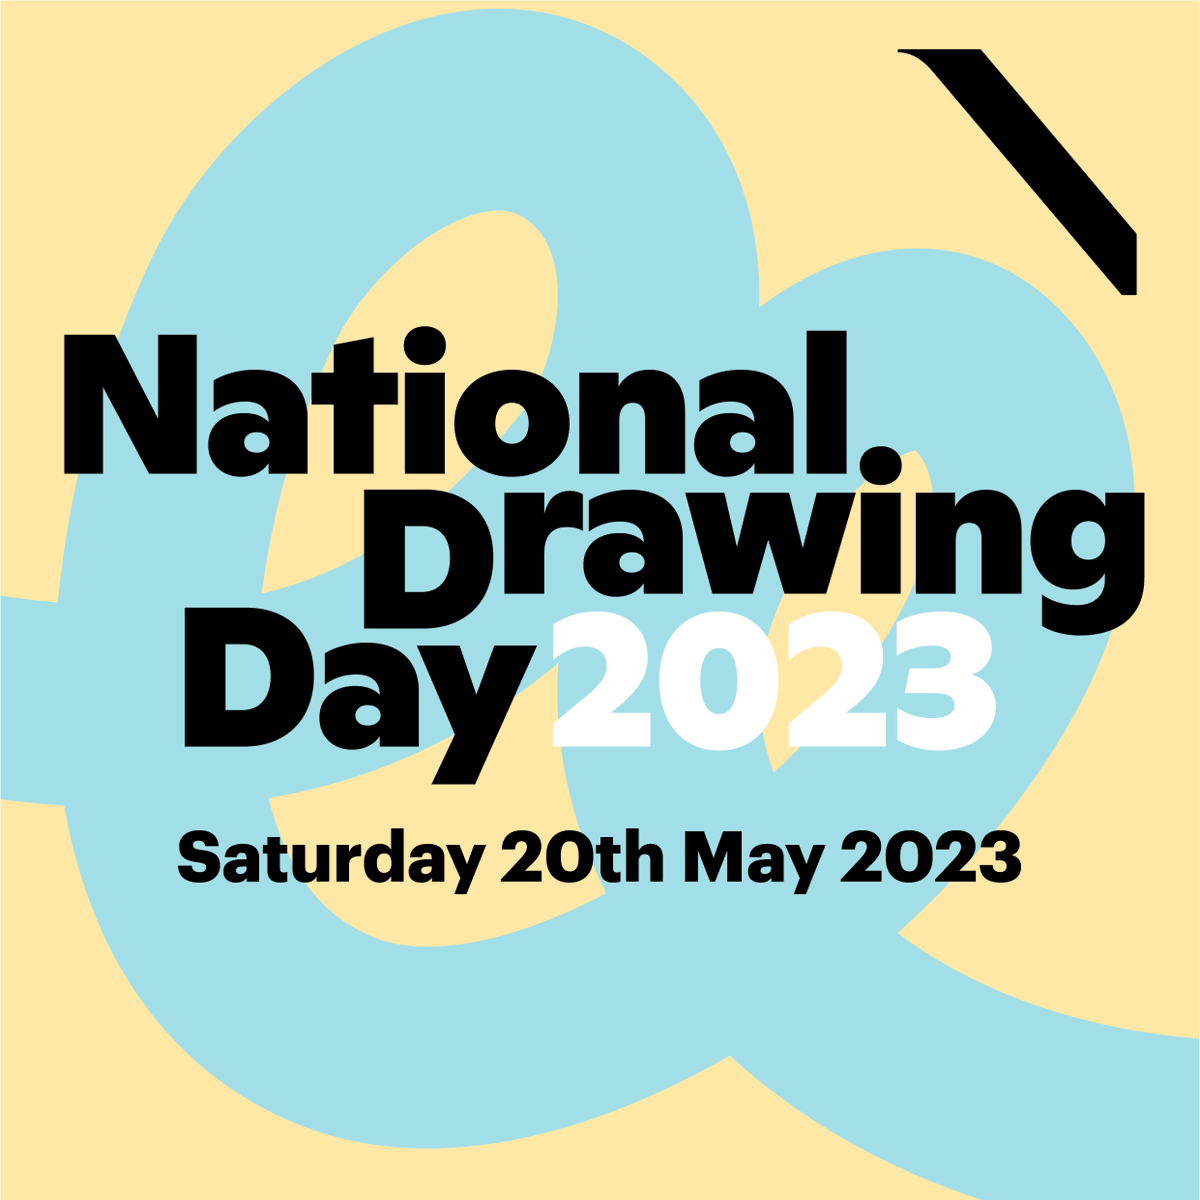 National Drawing Day at Butler Gallery! 
20th May from 12 - 4pm
Free drop-in activities for all ages 
From Shadow Puppet Workshops to Samba Drumming  & much more! More info at
butlergallery.ie/whats-on/natio… 
@nationalgalleryofireland @creativeireland  
@kilkennycoco  #NationalDrawingDay